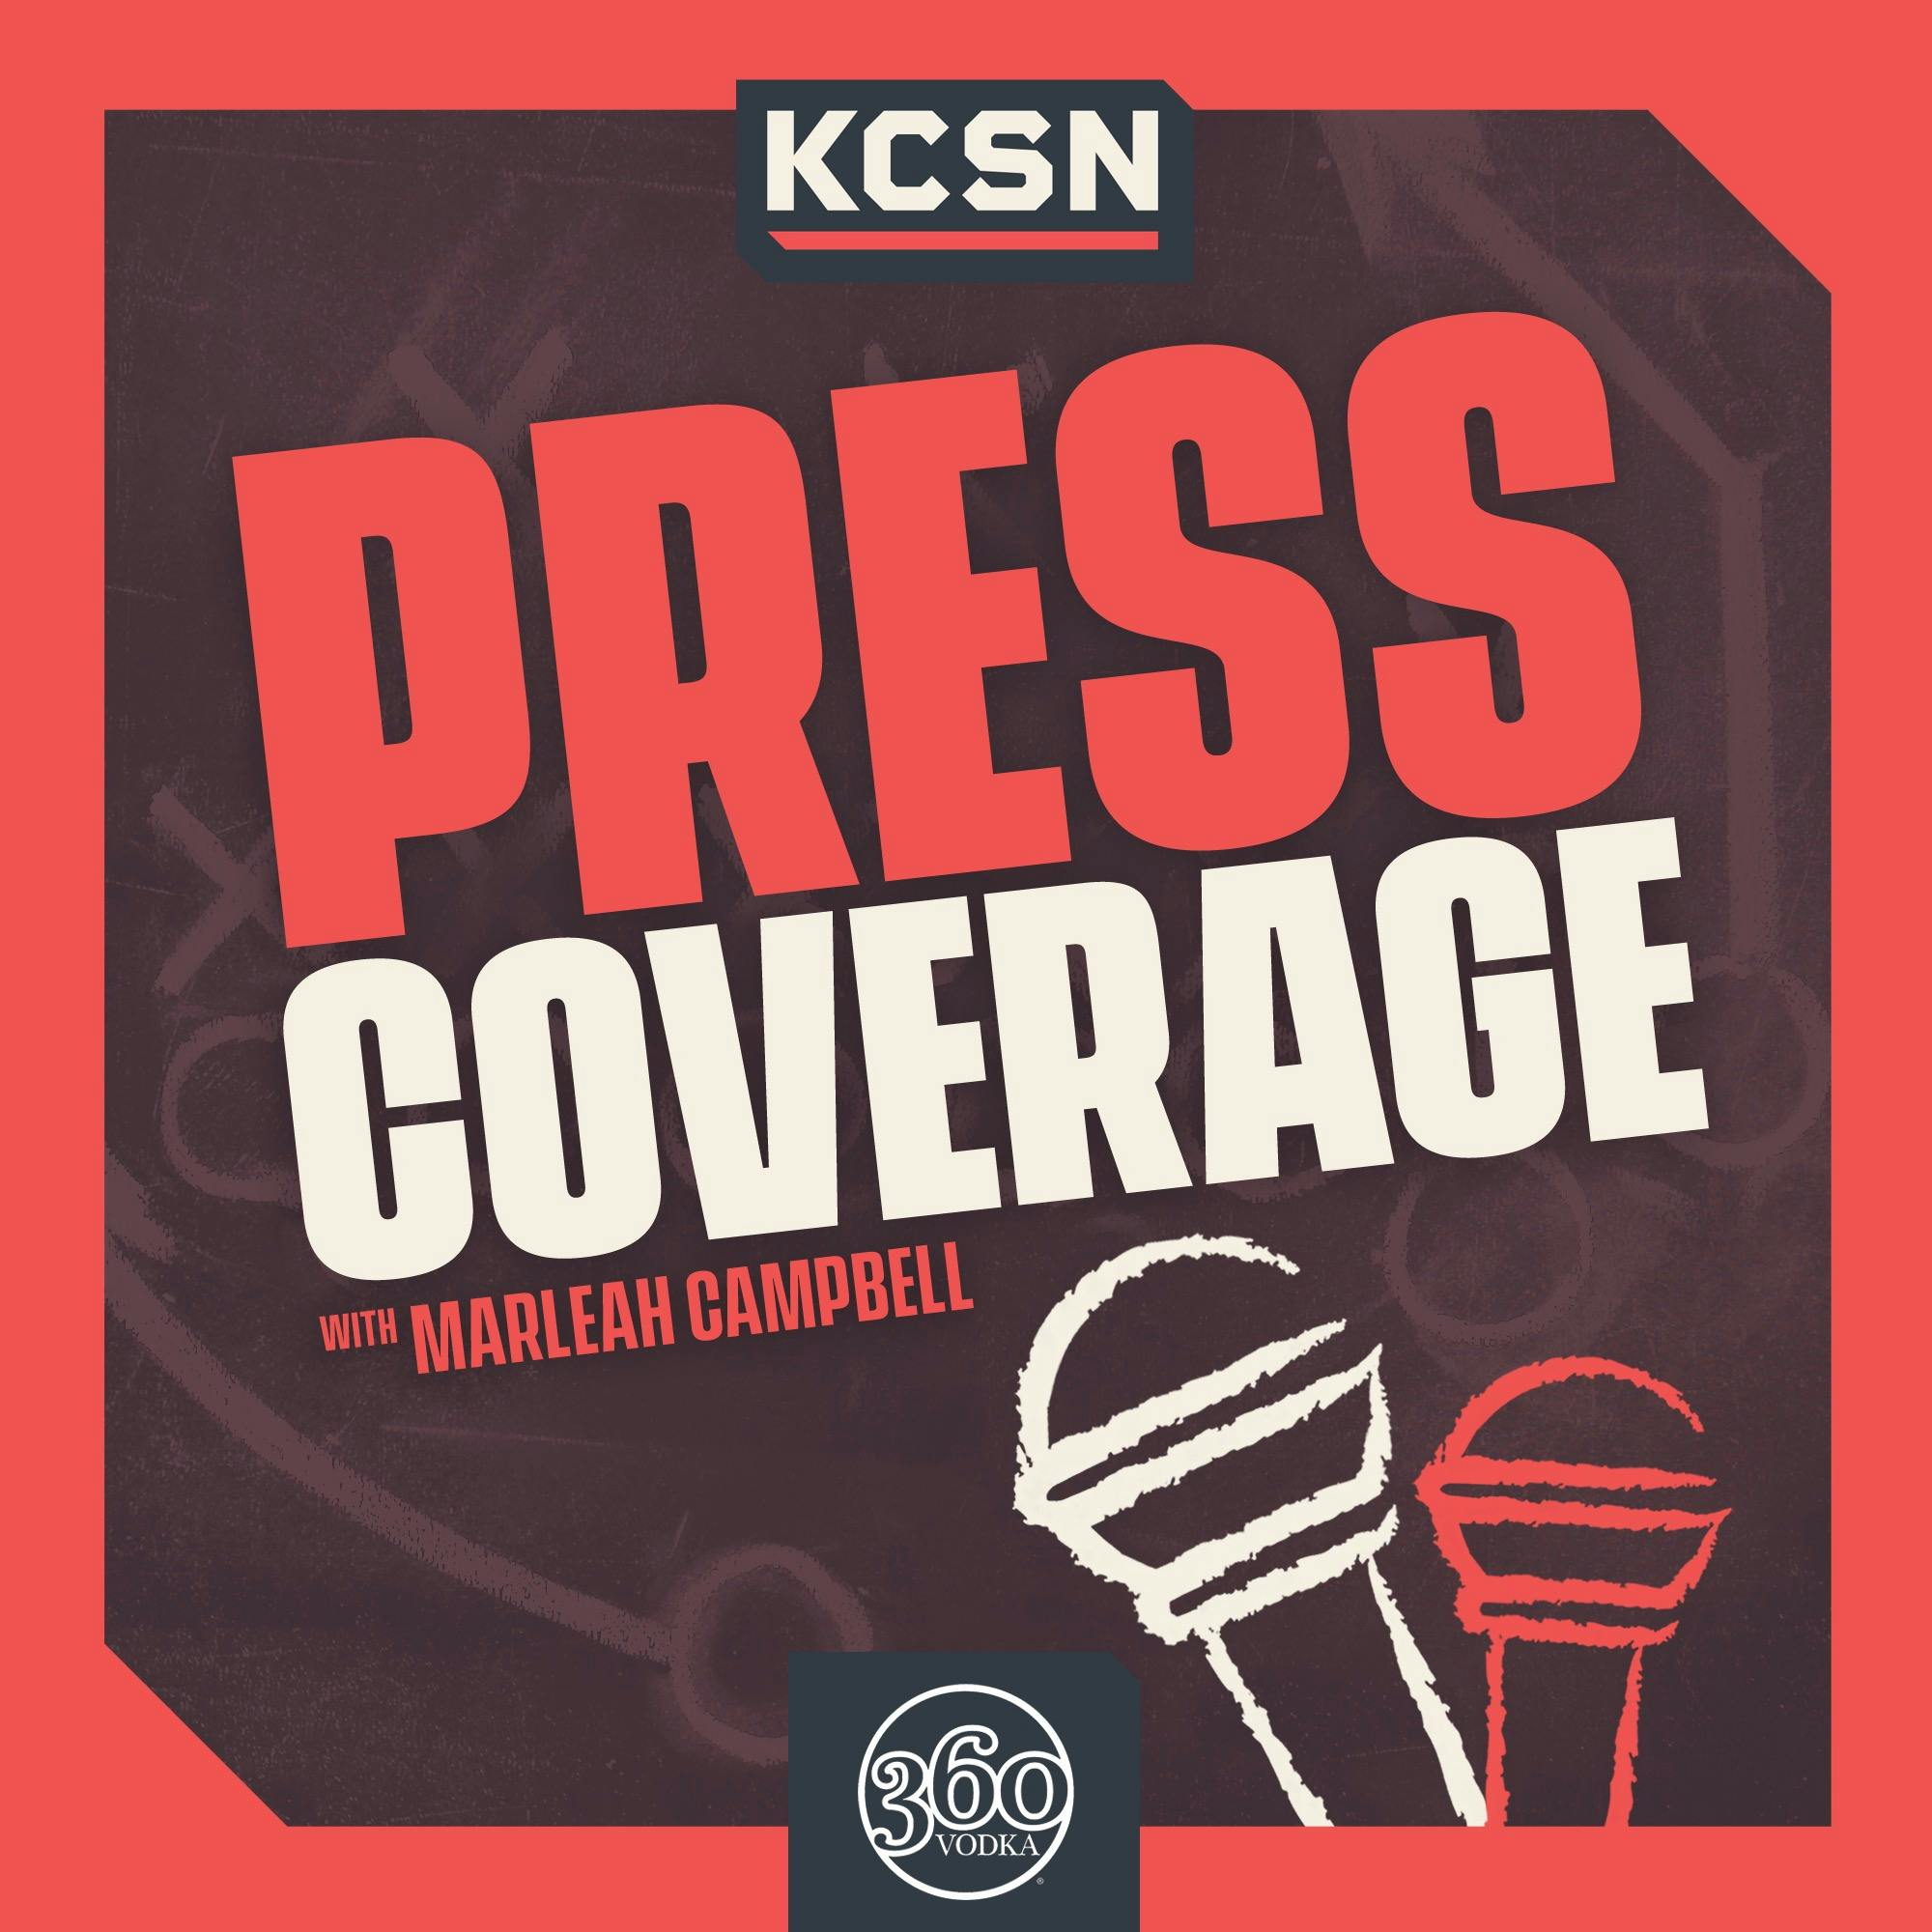 Chiefs Are Back Home To Take on Struggling Seahawks | Press Coverage 12/24